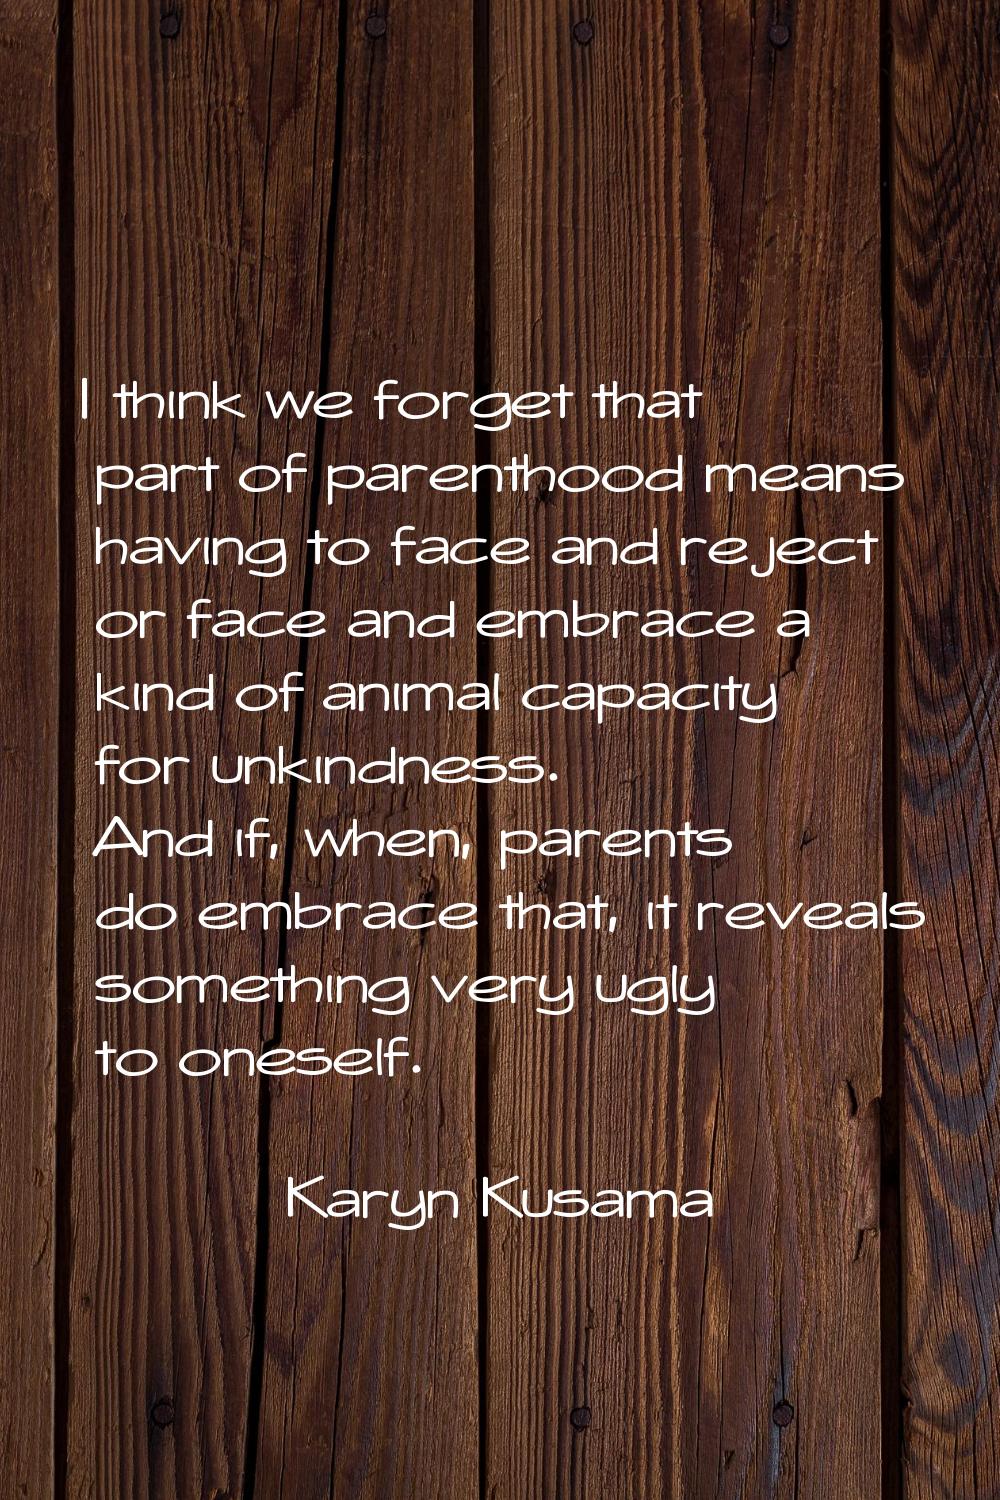 I think we forget that part of parenthood means having to face and reject or face and embrace a kin